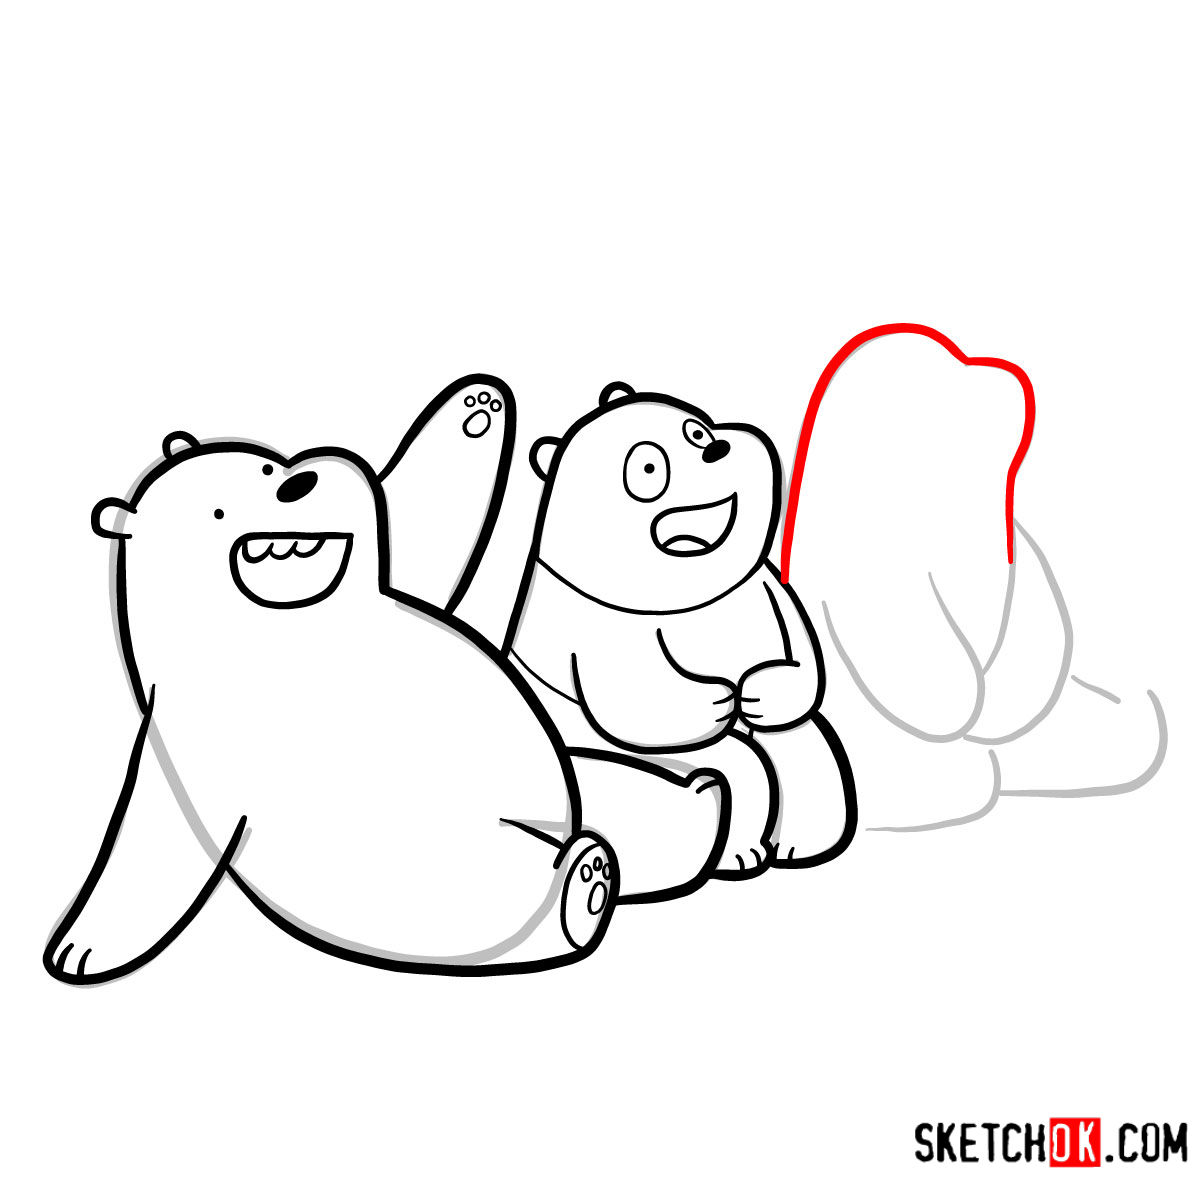 How to draw all three bears together | We Bare Bears - step 16